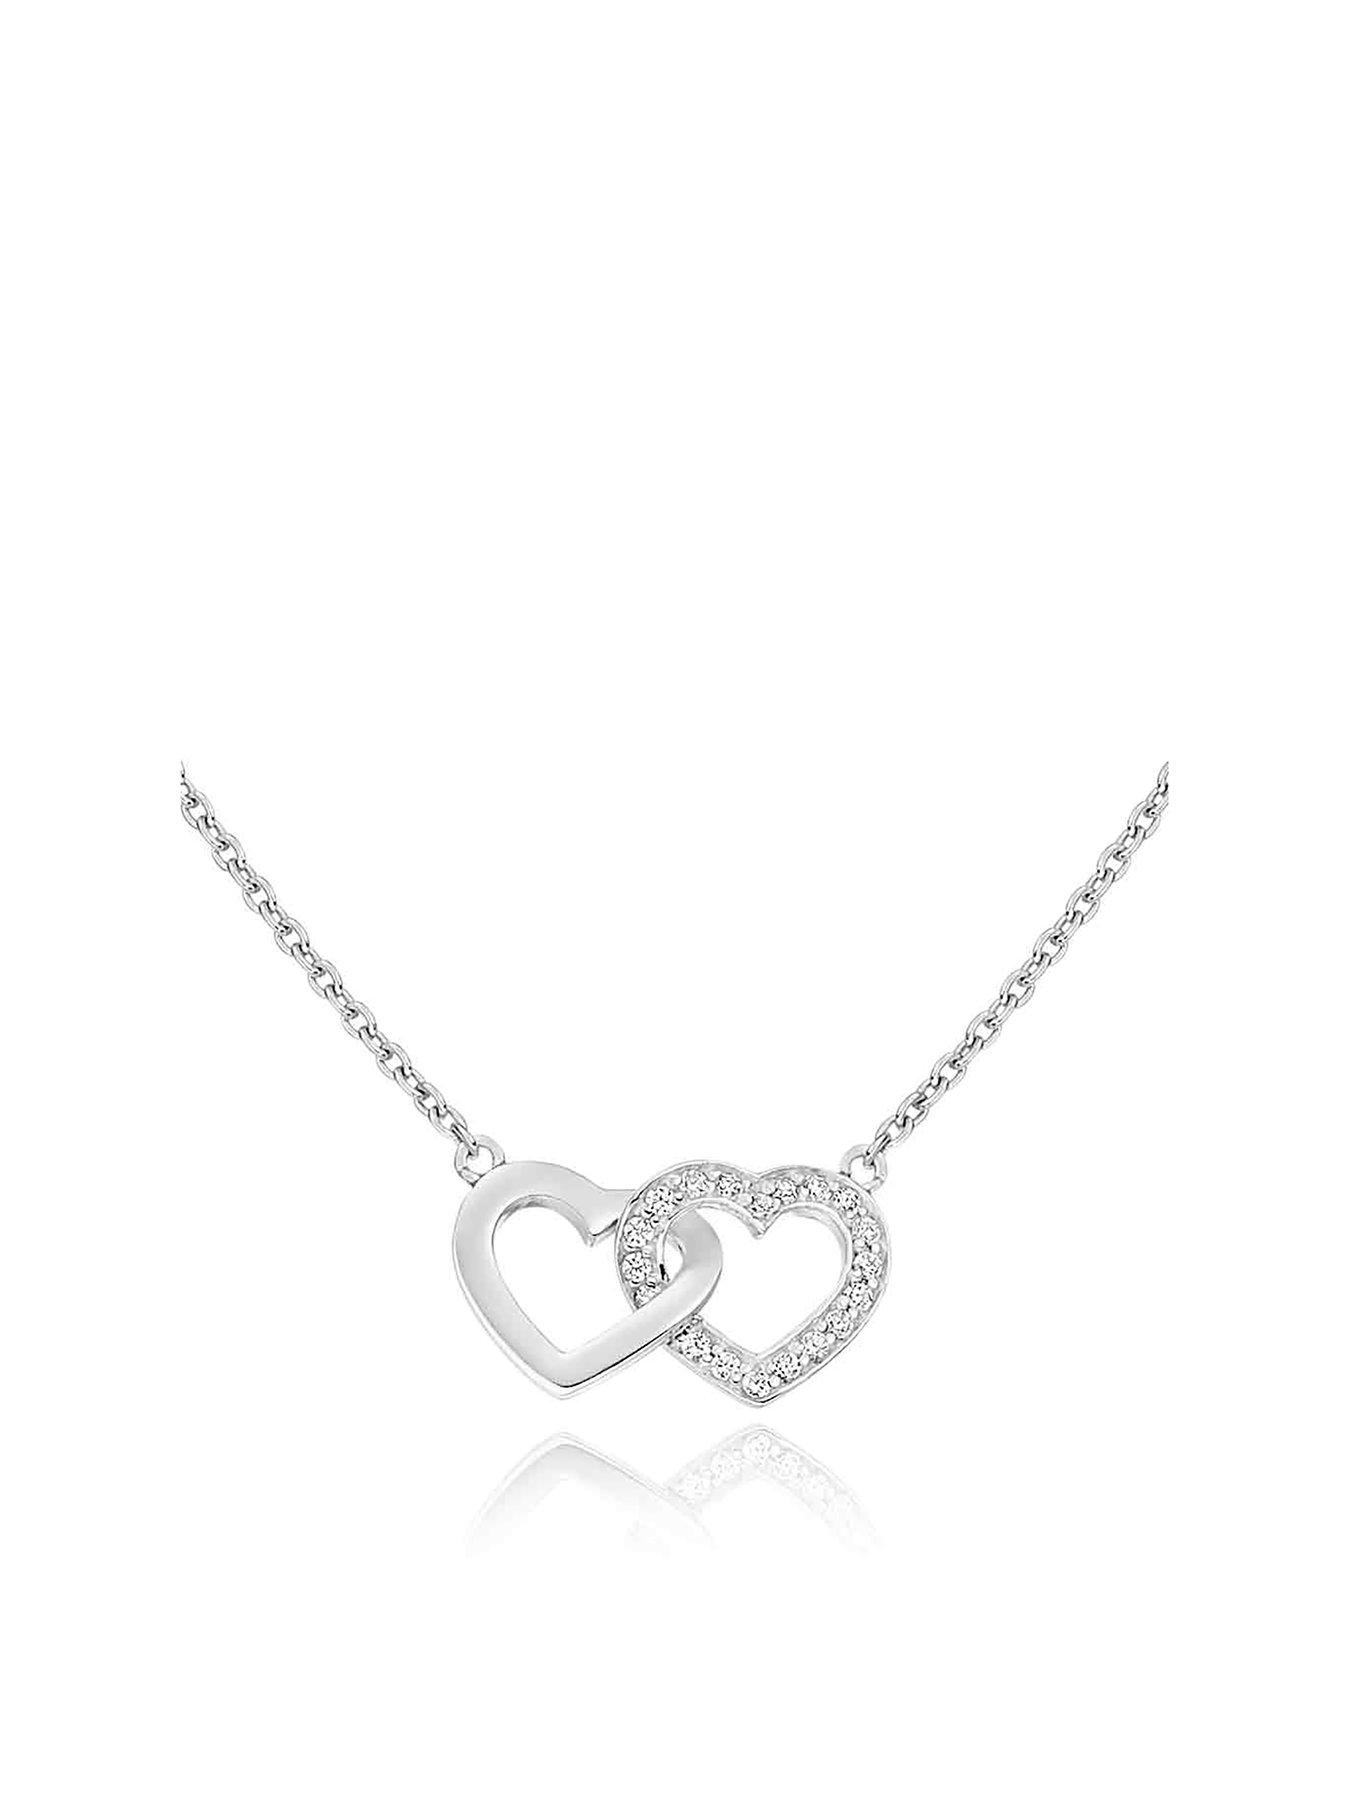 Womens | Necklaces | Gifts & jewellery | www.littlewoods.com